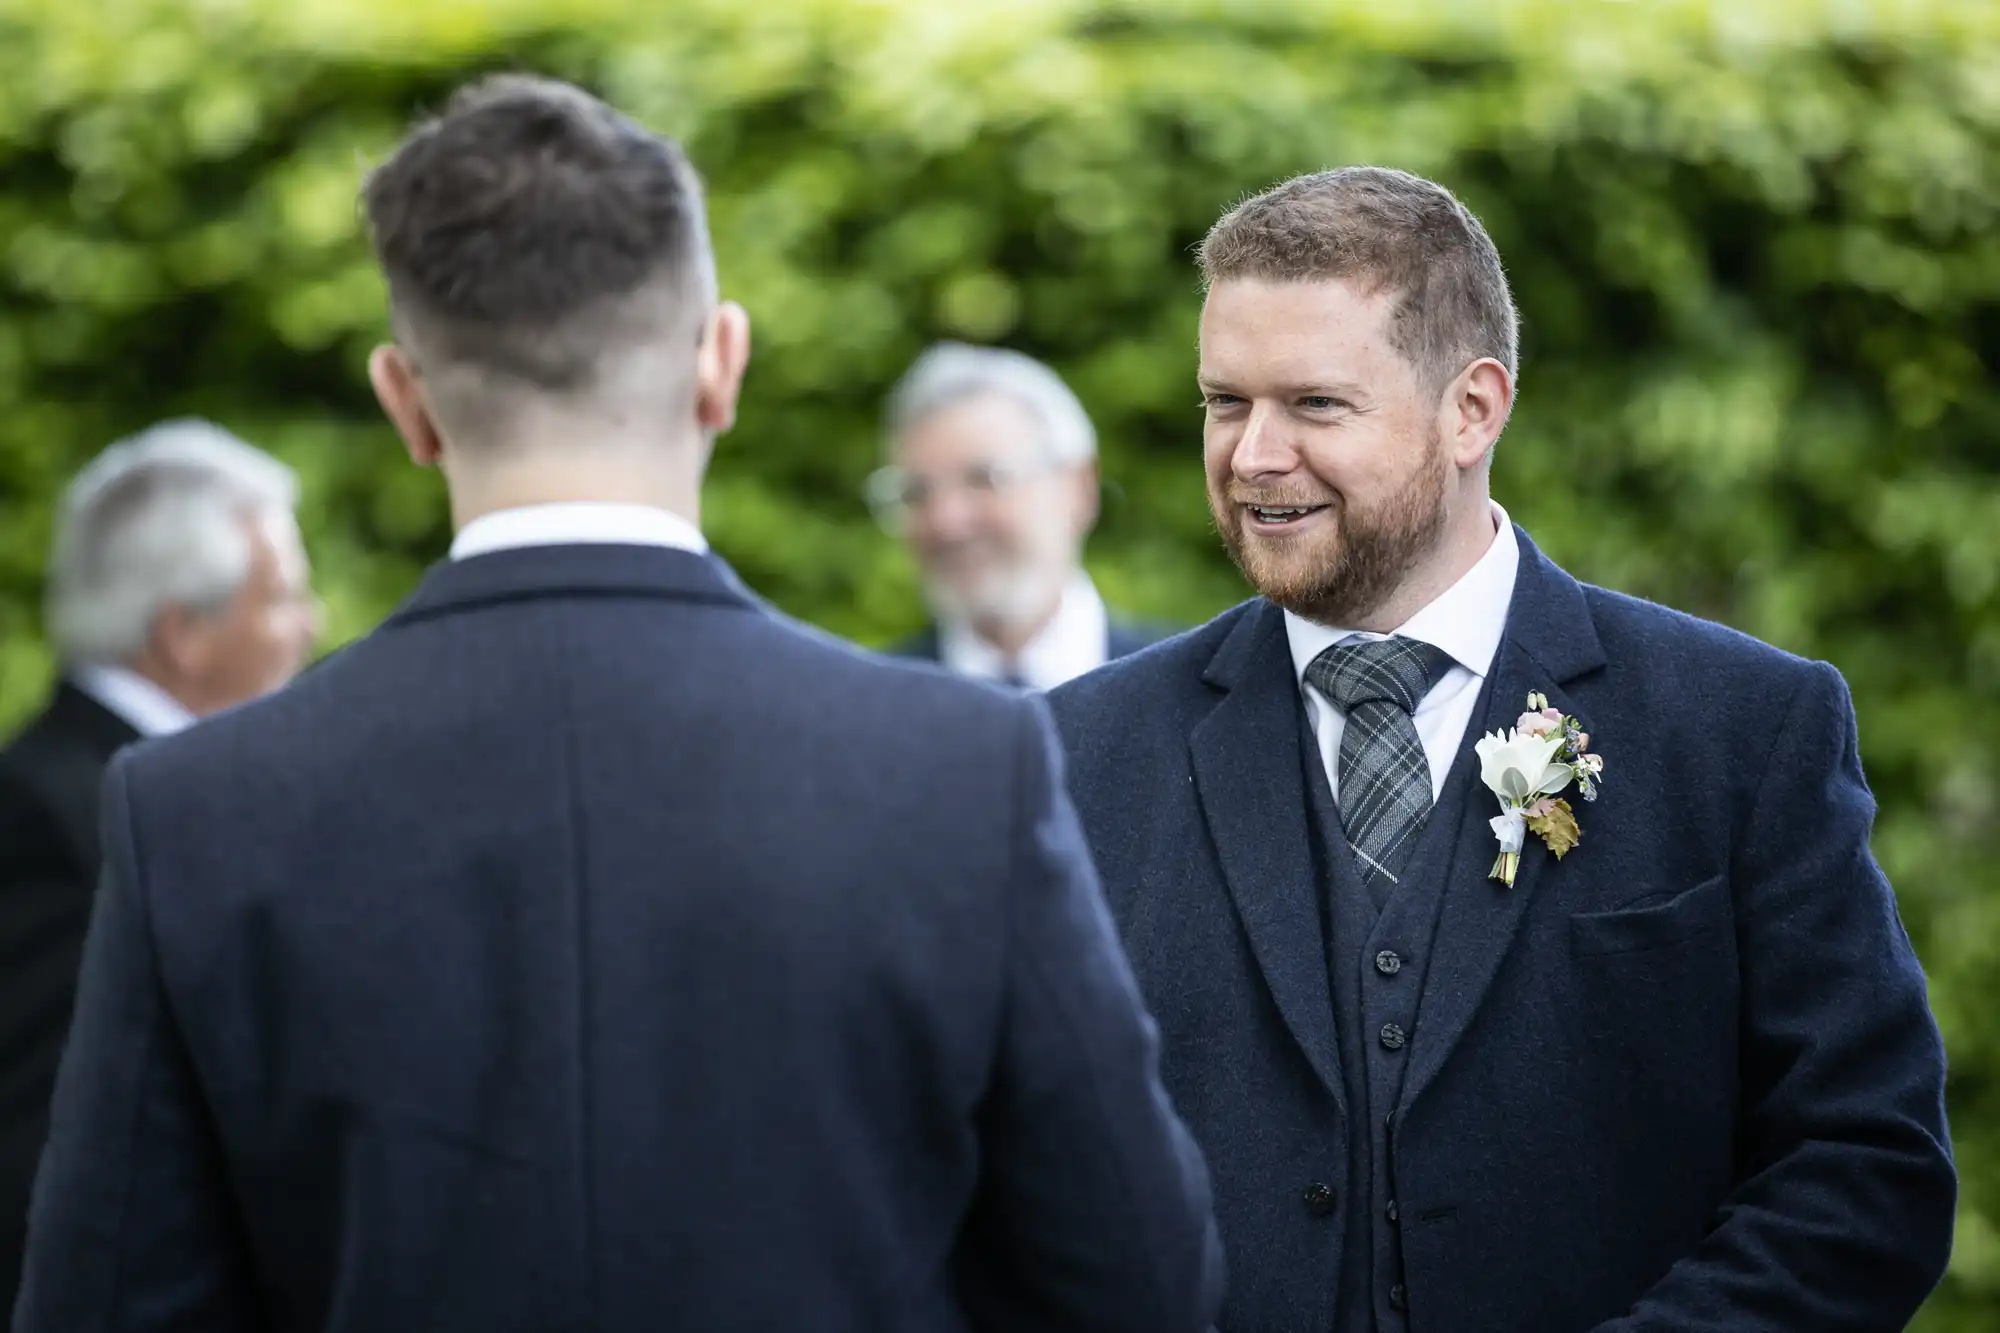 A groom in a suit with a boutonniere smiles at another man in a formal setting, with older guests in the blurred background.